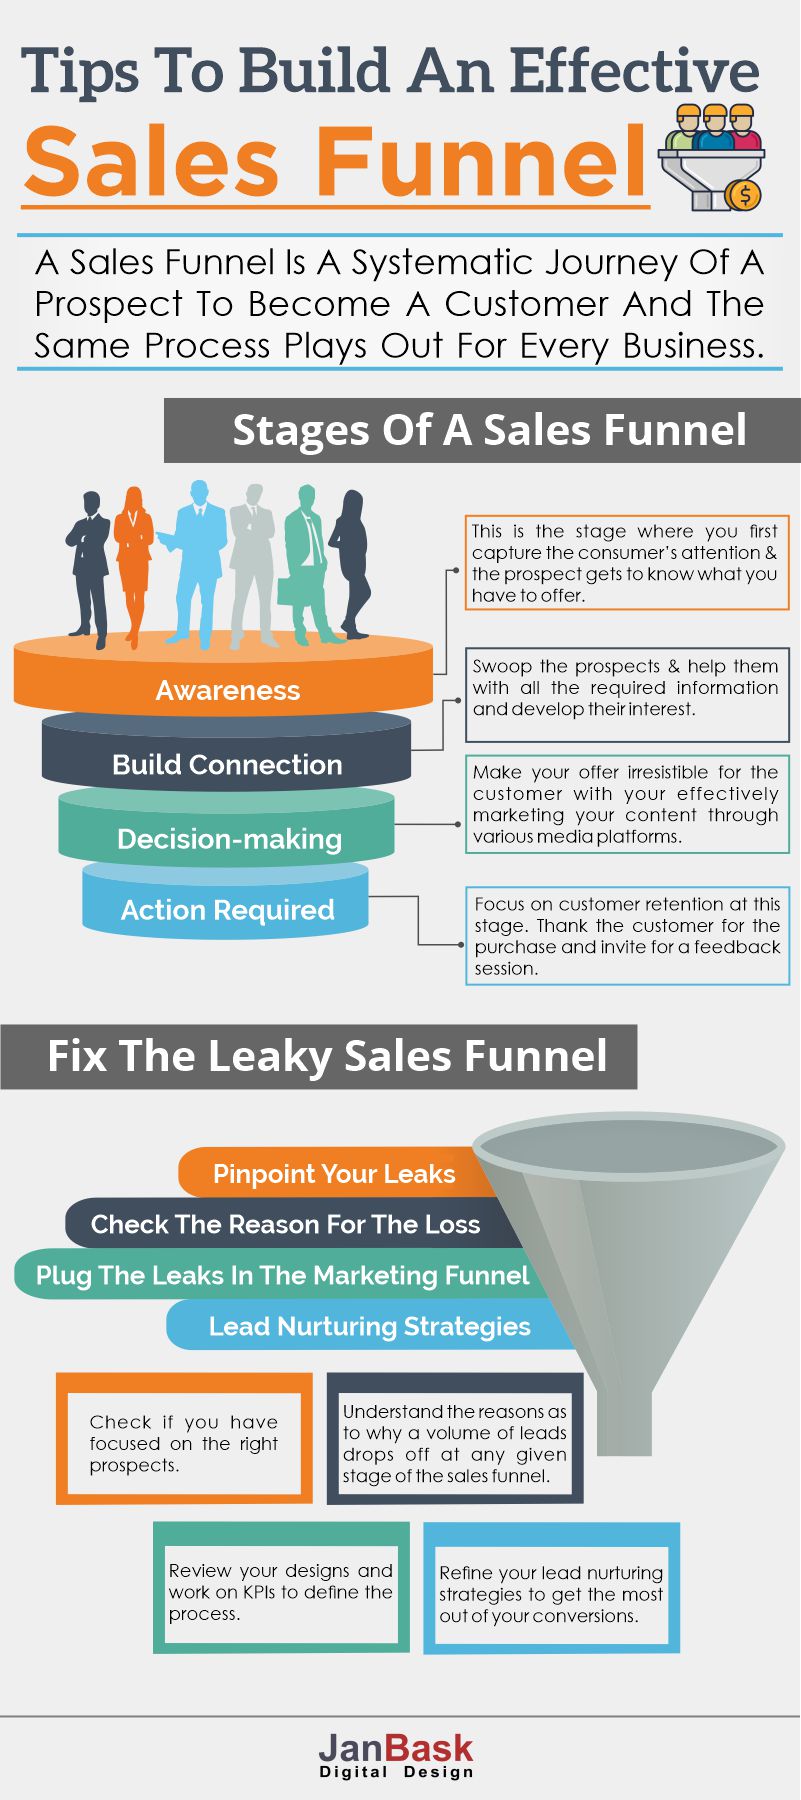 Tips to build an effective sales funnel